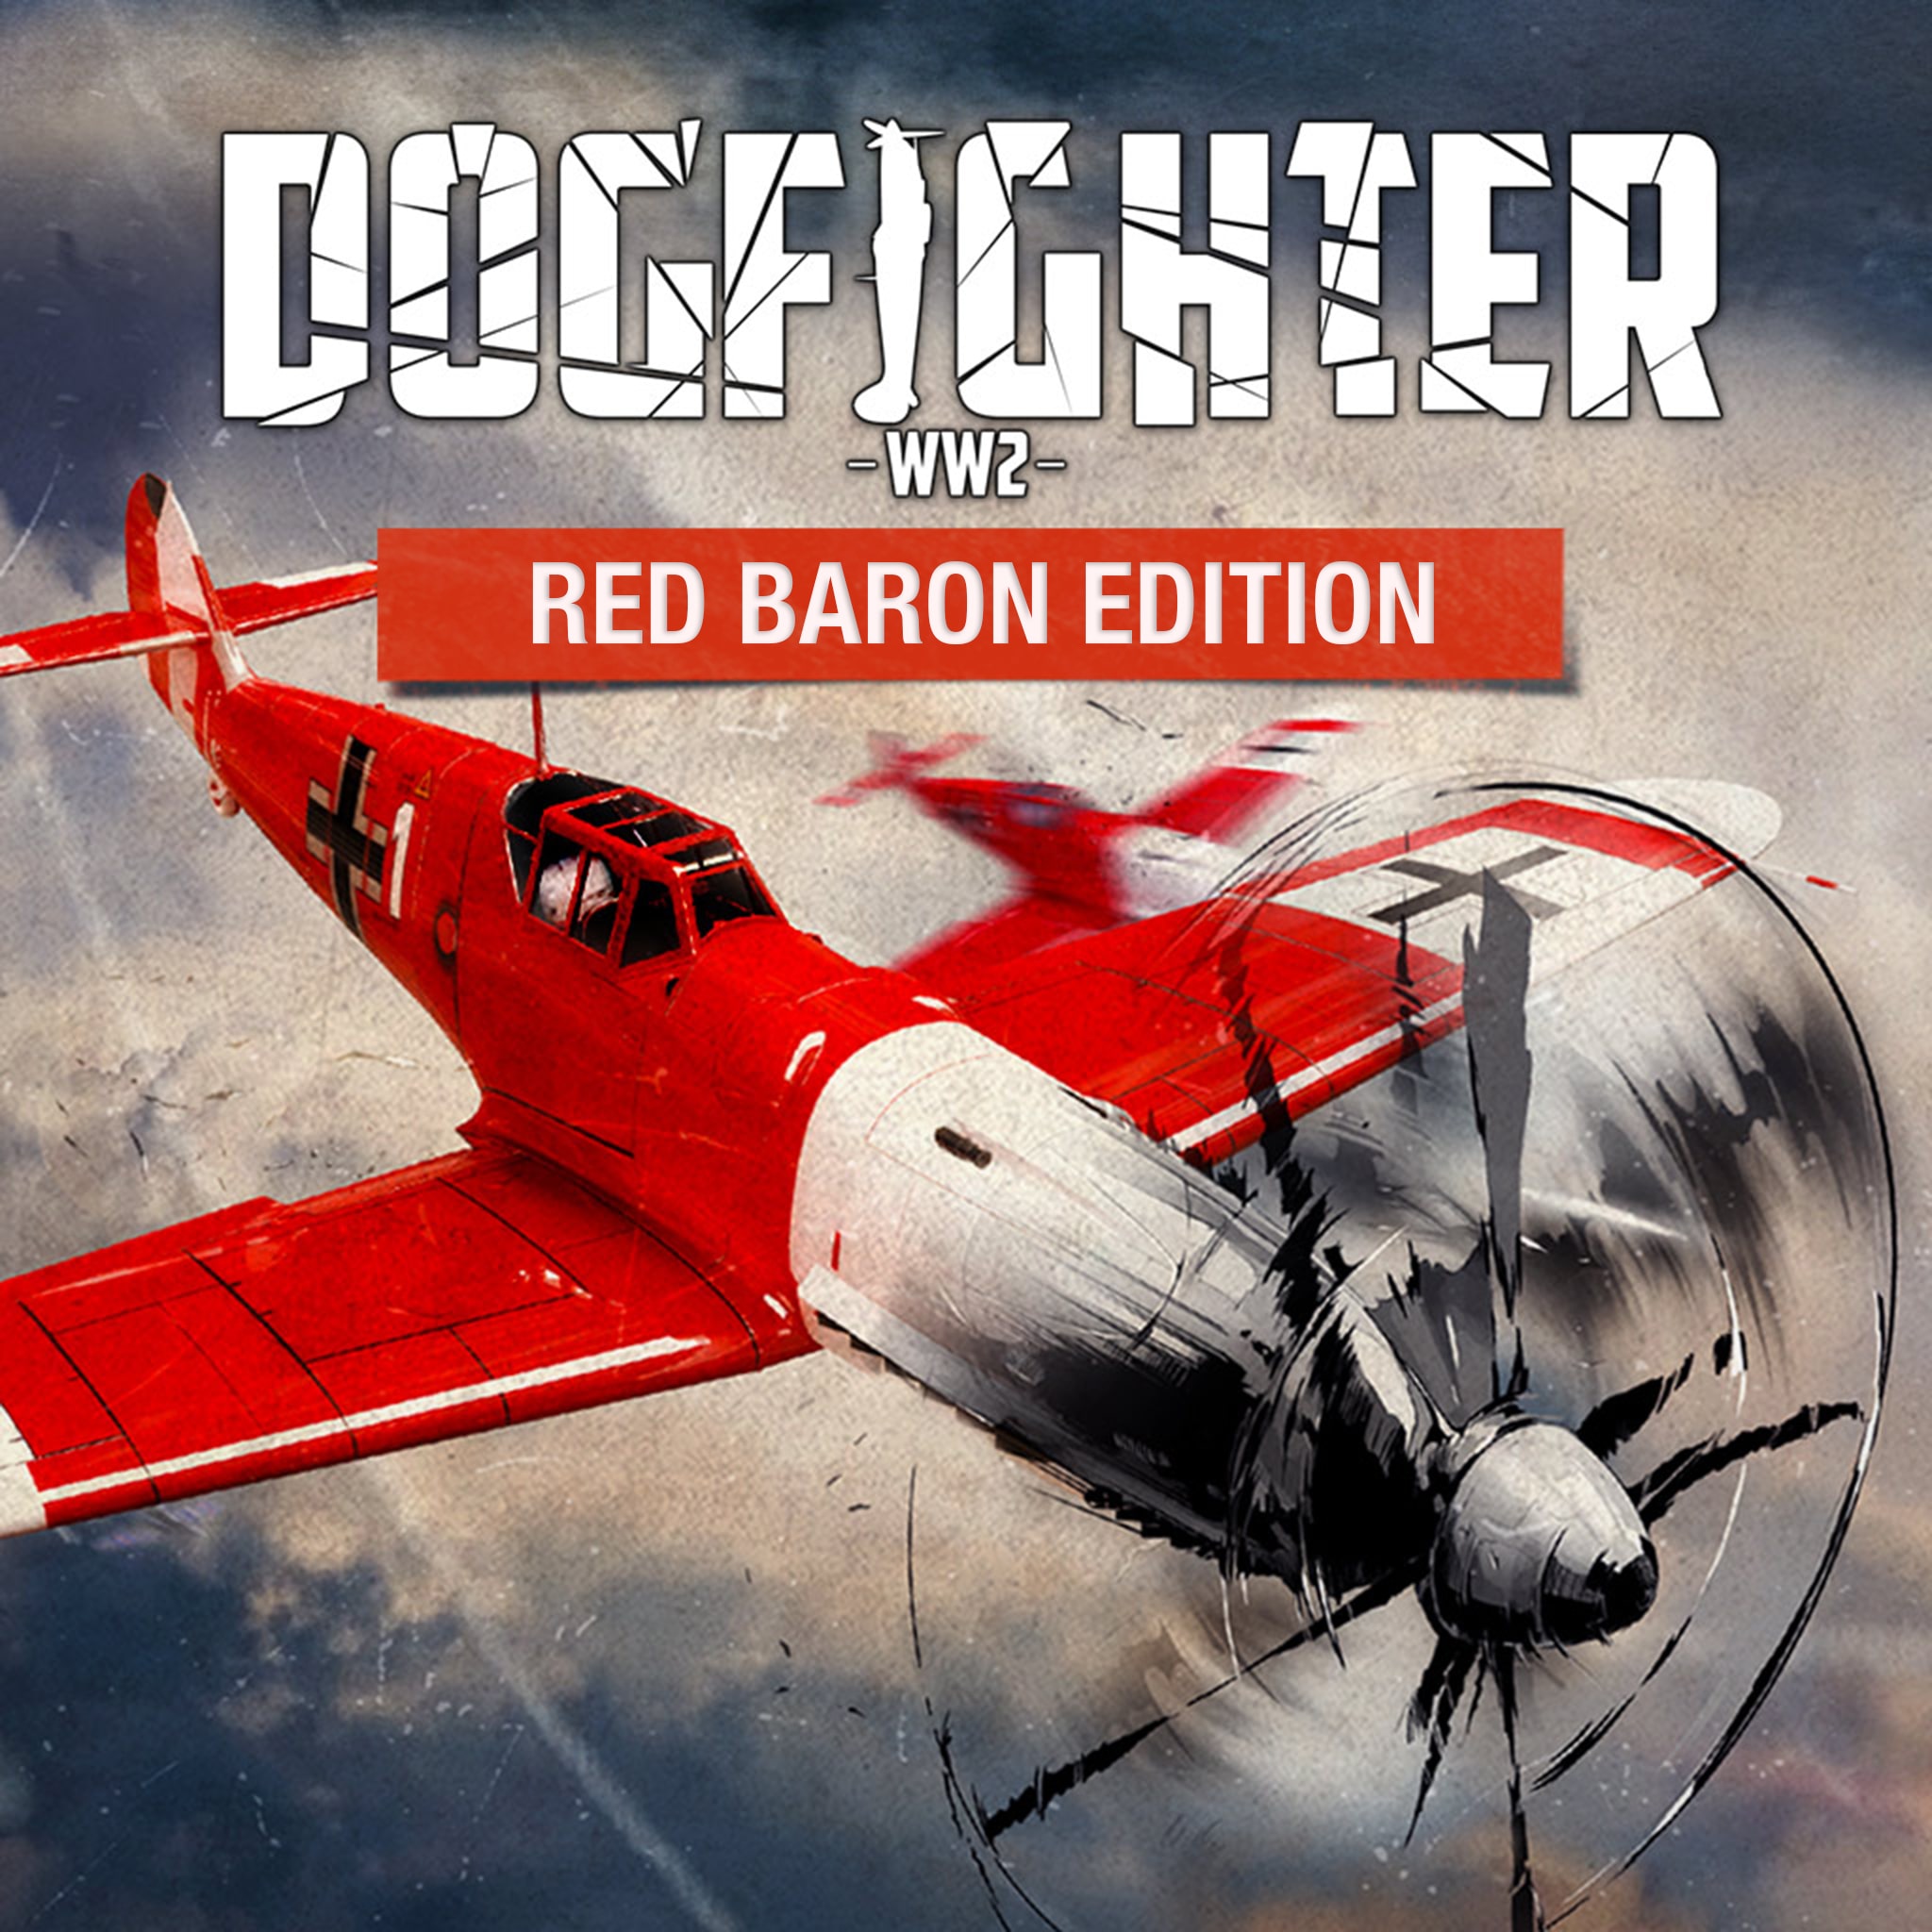 DOGFIGHTER -WW2- RED BARON